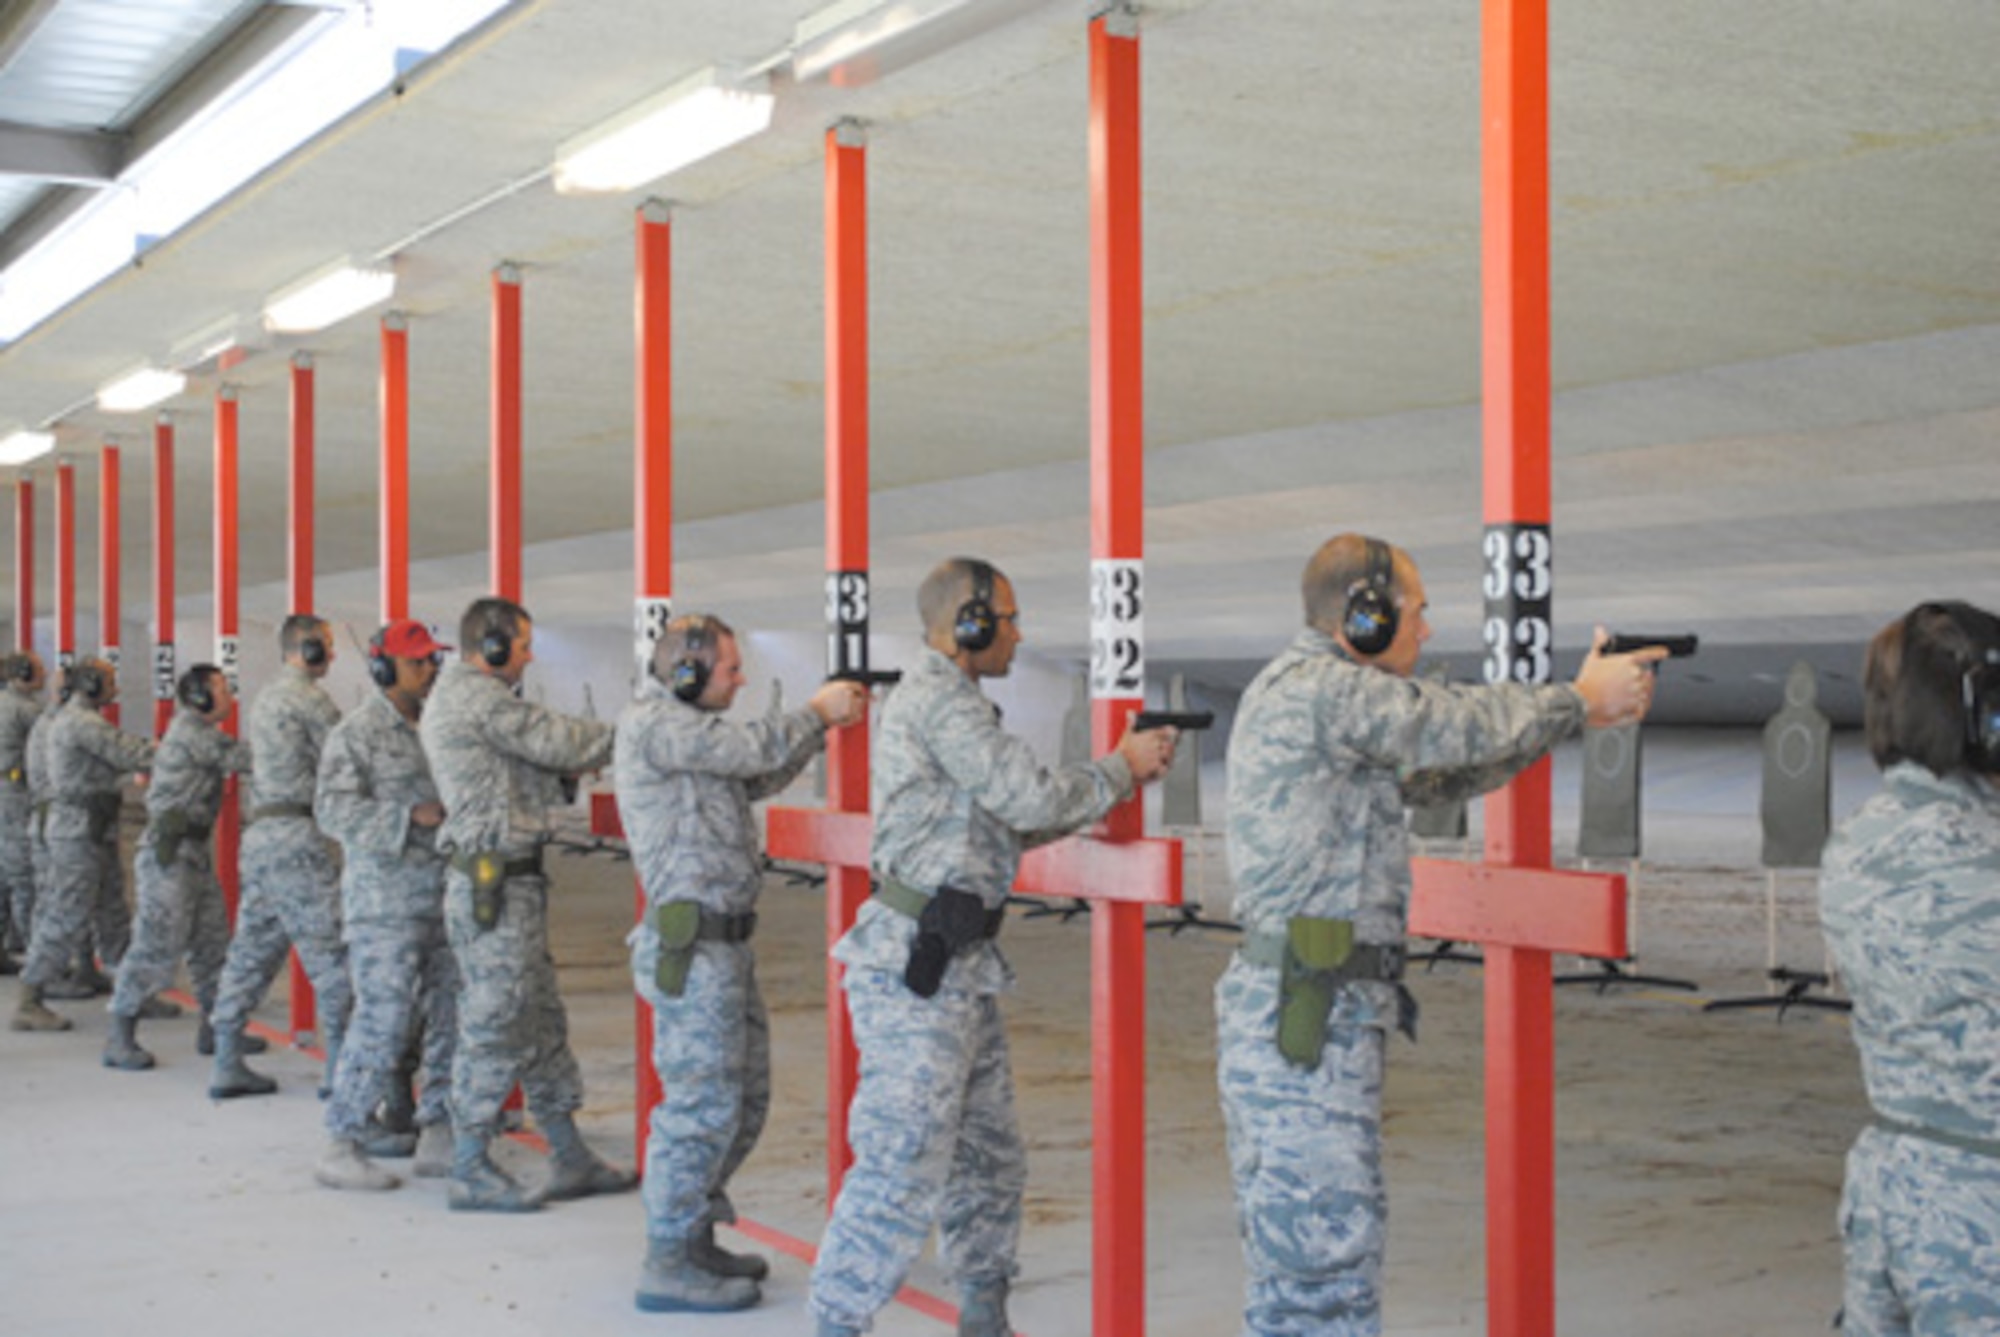 The new Maxwell Air Force Base firing range opened recently, featuring two bays with 42 firing points each, sound-reducing material and the ability to withstand higher-caliber ammunition. (Air Force photo/Christopher Kratzer)